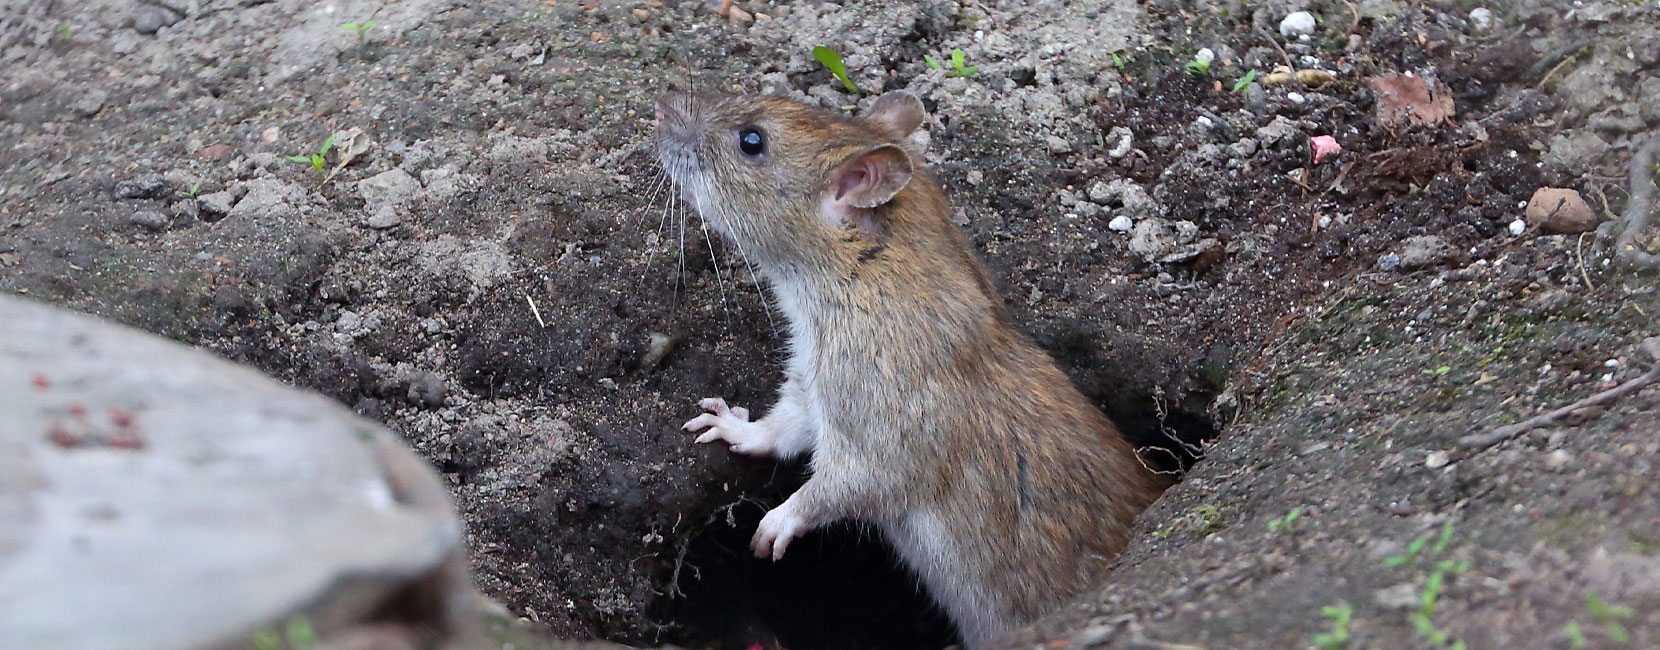 How Can I Get Rid of Rat Burrows and Holes Around My House? - Pests In The Home